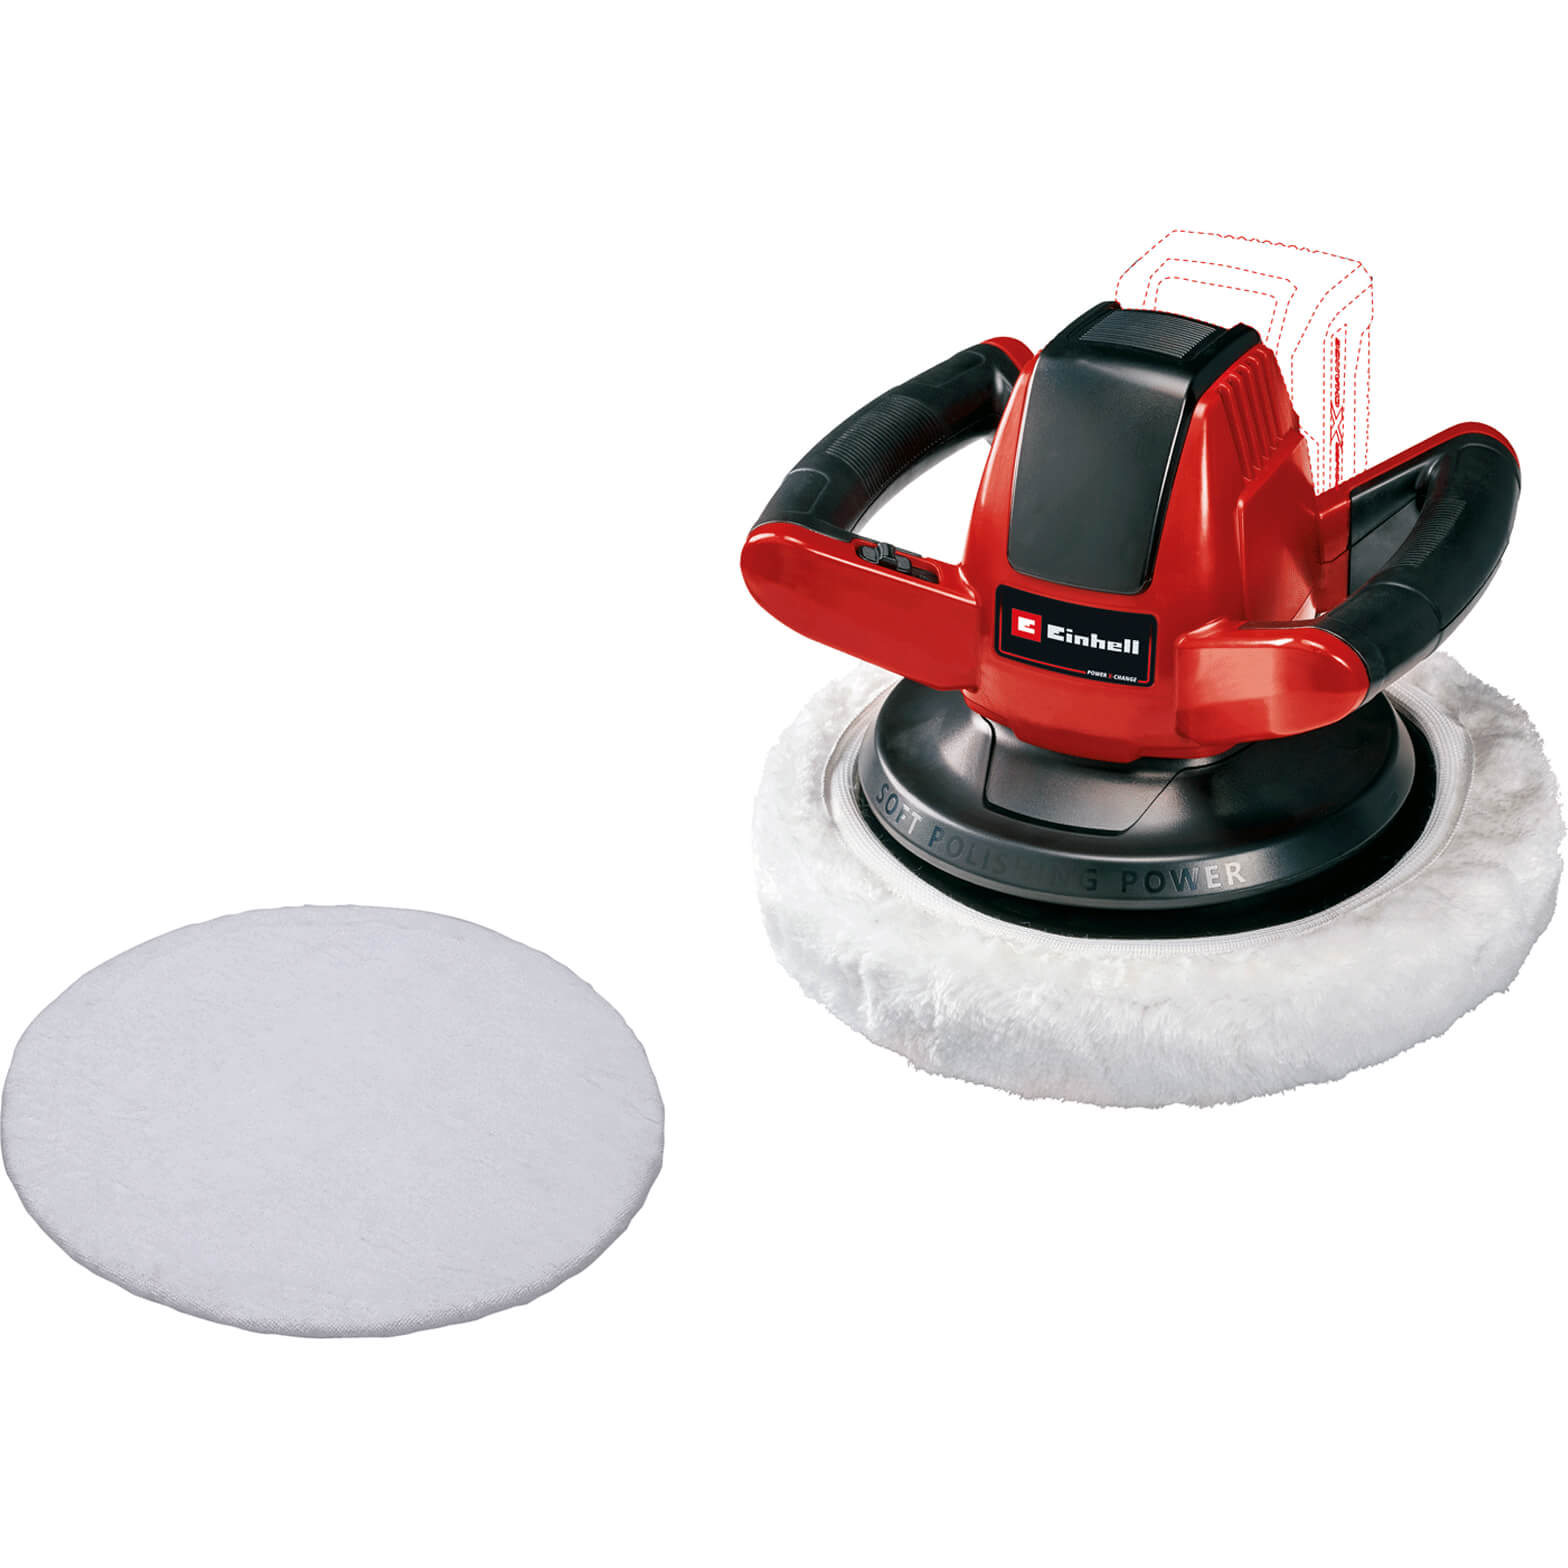 Image of Einhell CE-CB 18/254 Li 18v Cordless Car Buffer and Polisher No Batteries No Charger No Case